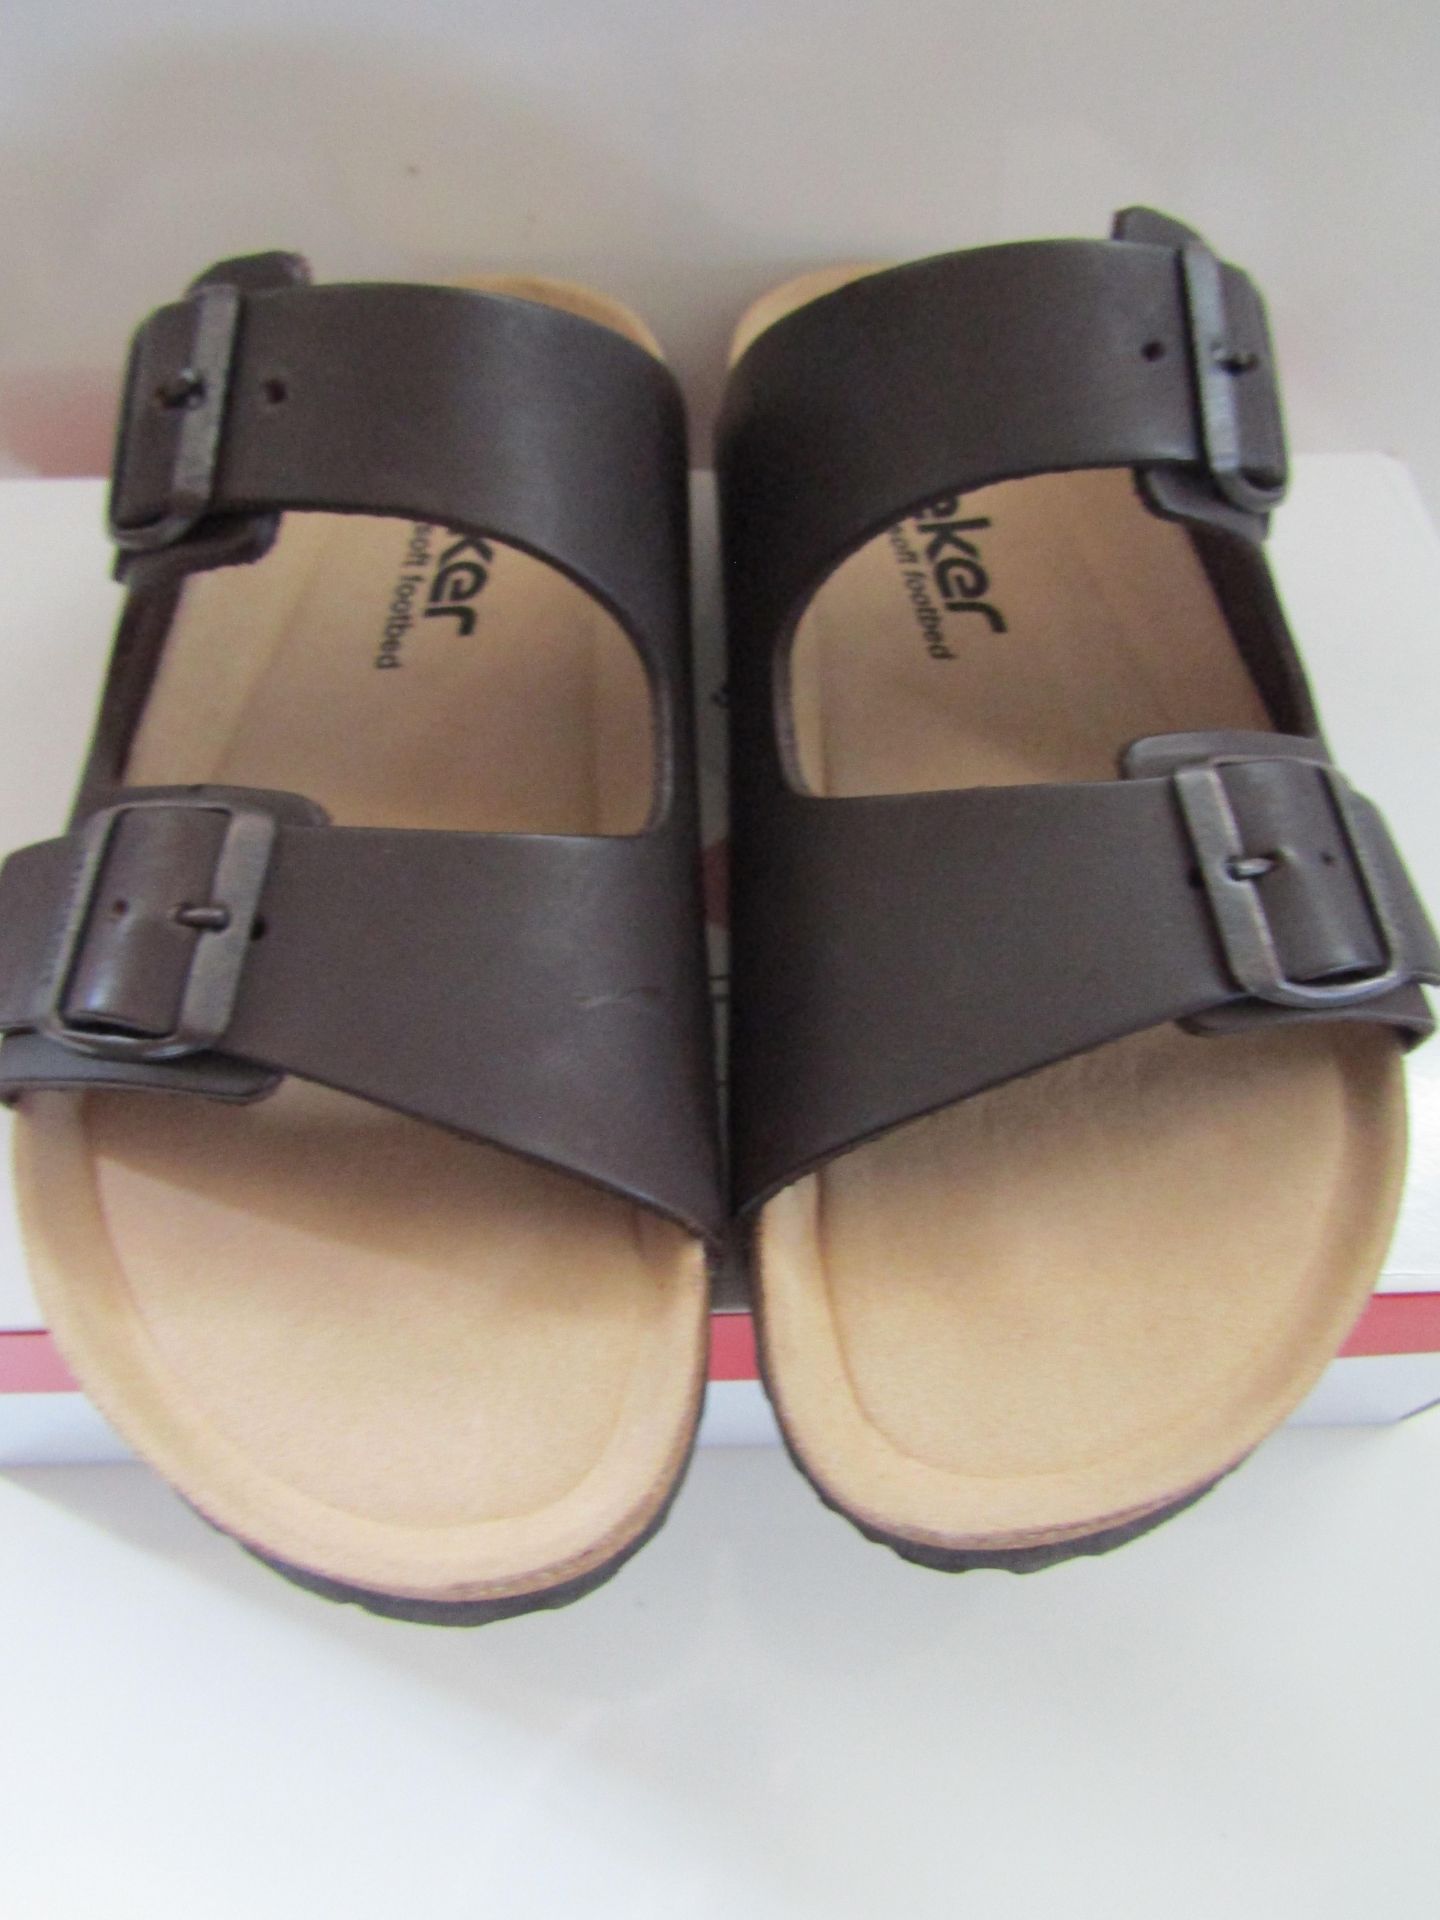 Rieker Sandal Brown Size 41 New & Boxed - Image 3 of 3